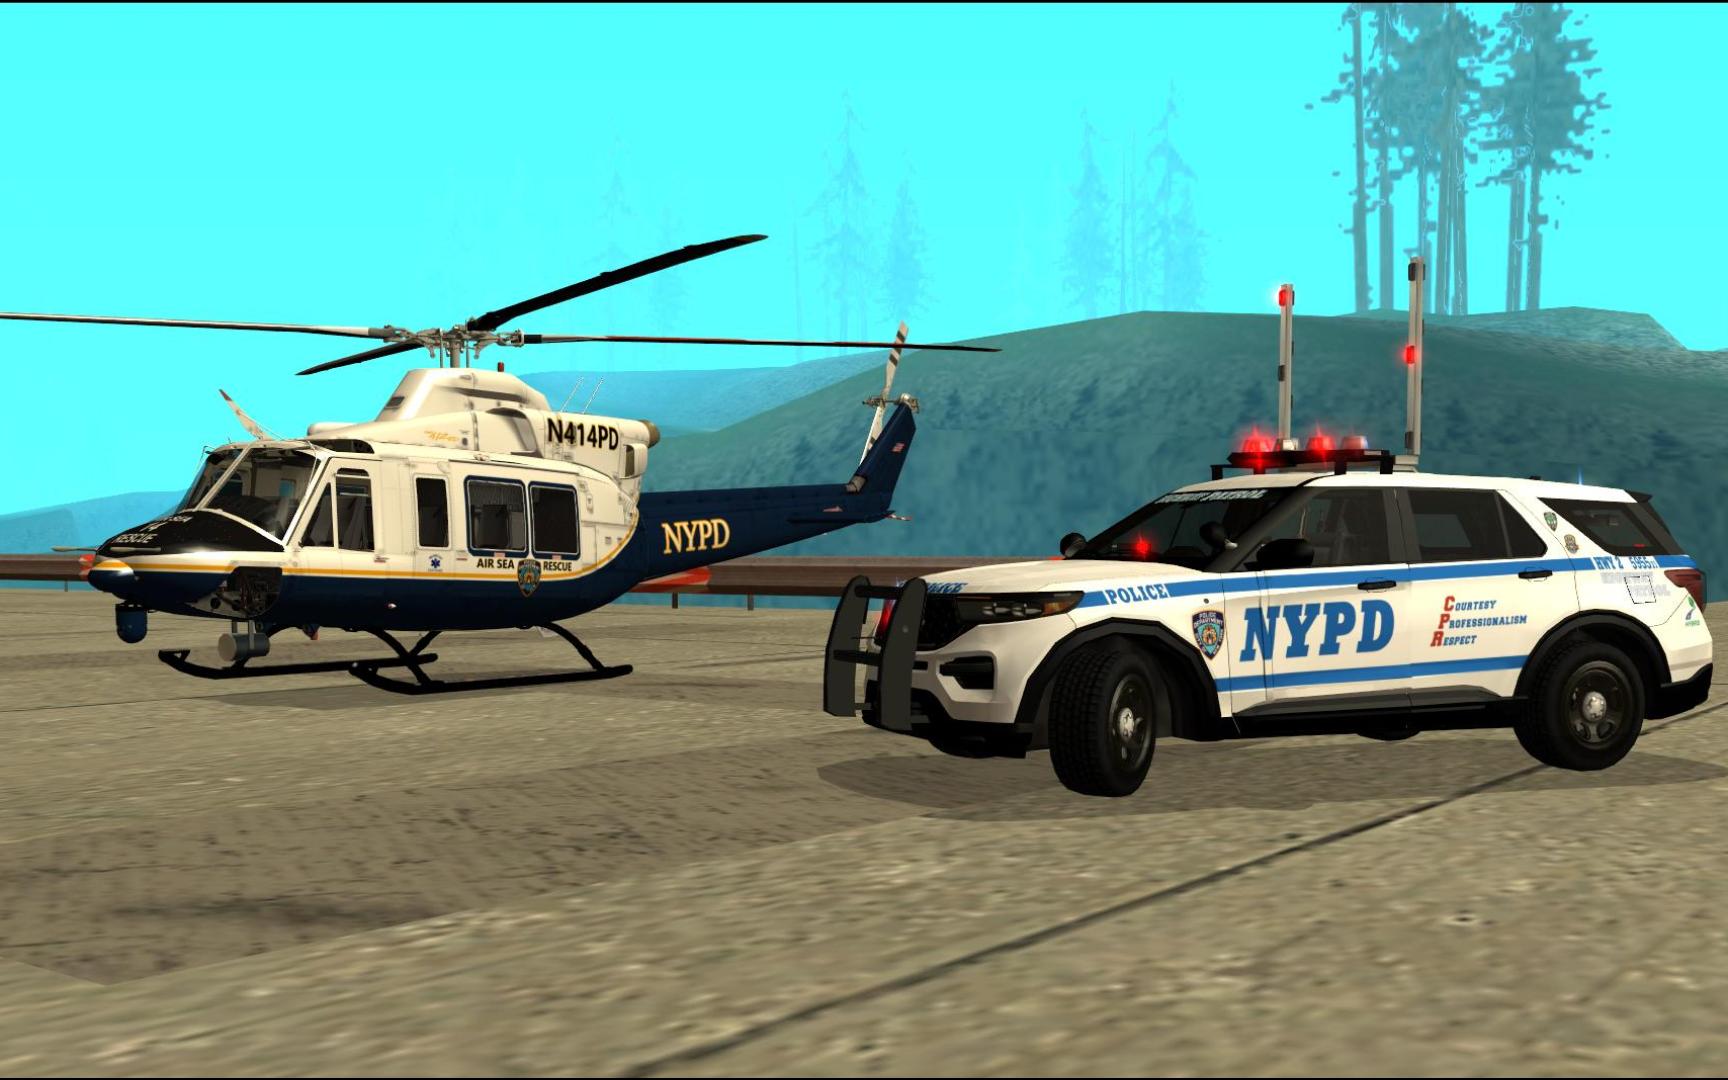 NYP HWY 20 Explorer&NYPD Bell 412EP